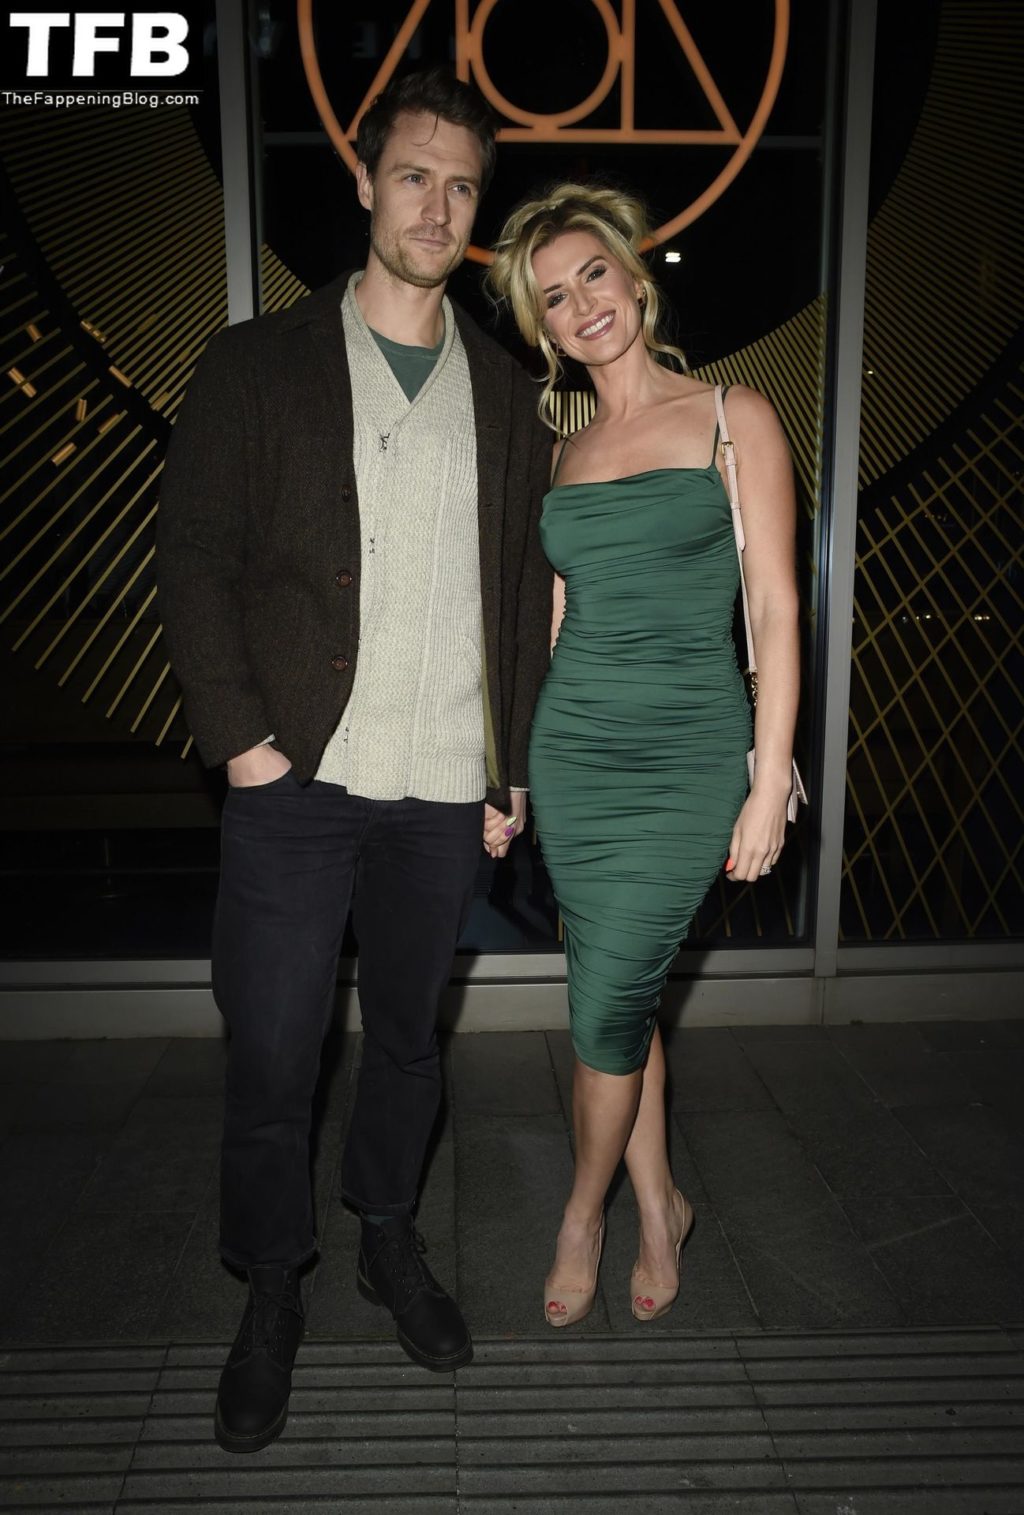 Sarah Jayne Dunn Sexy The Fappening Blog 14 1024x1515 - Sarah Jayne Dunn Looks Hot in a Green Dress Arriving at the Re-Launch of The Alchemist in Spinningfields (26 Photos)